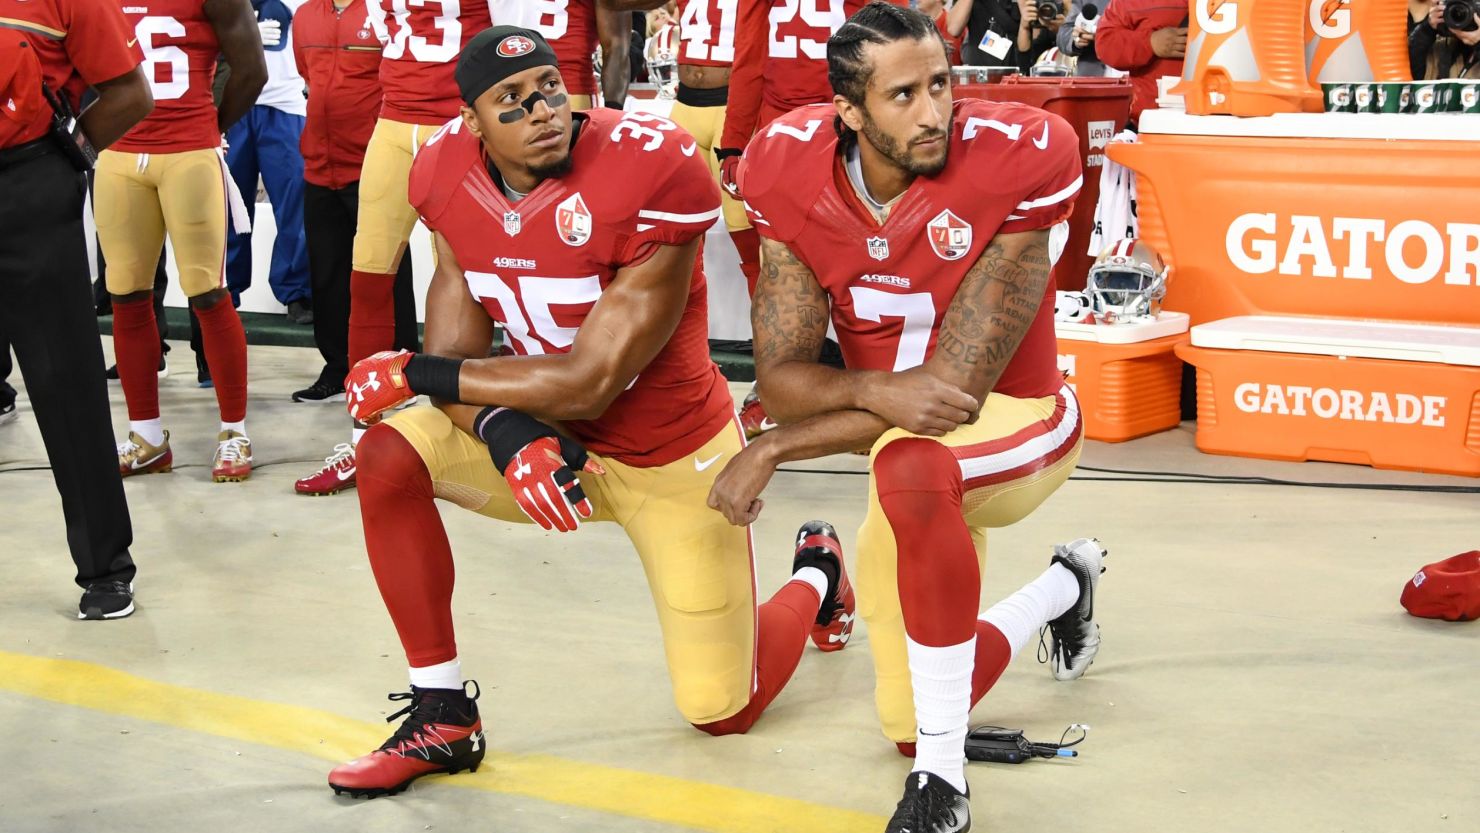 Eric Reid, left, and Colin Kaepernick of the San Francisco 49ers kneel during the National Anthem before an NFL game on September 12, 2016, at Levi's Stadium in Santa Clara, California.